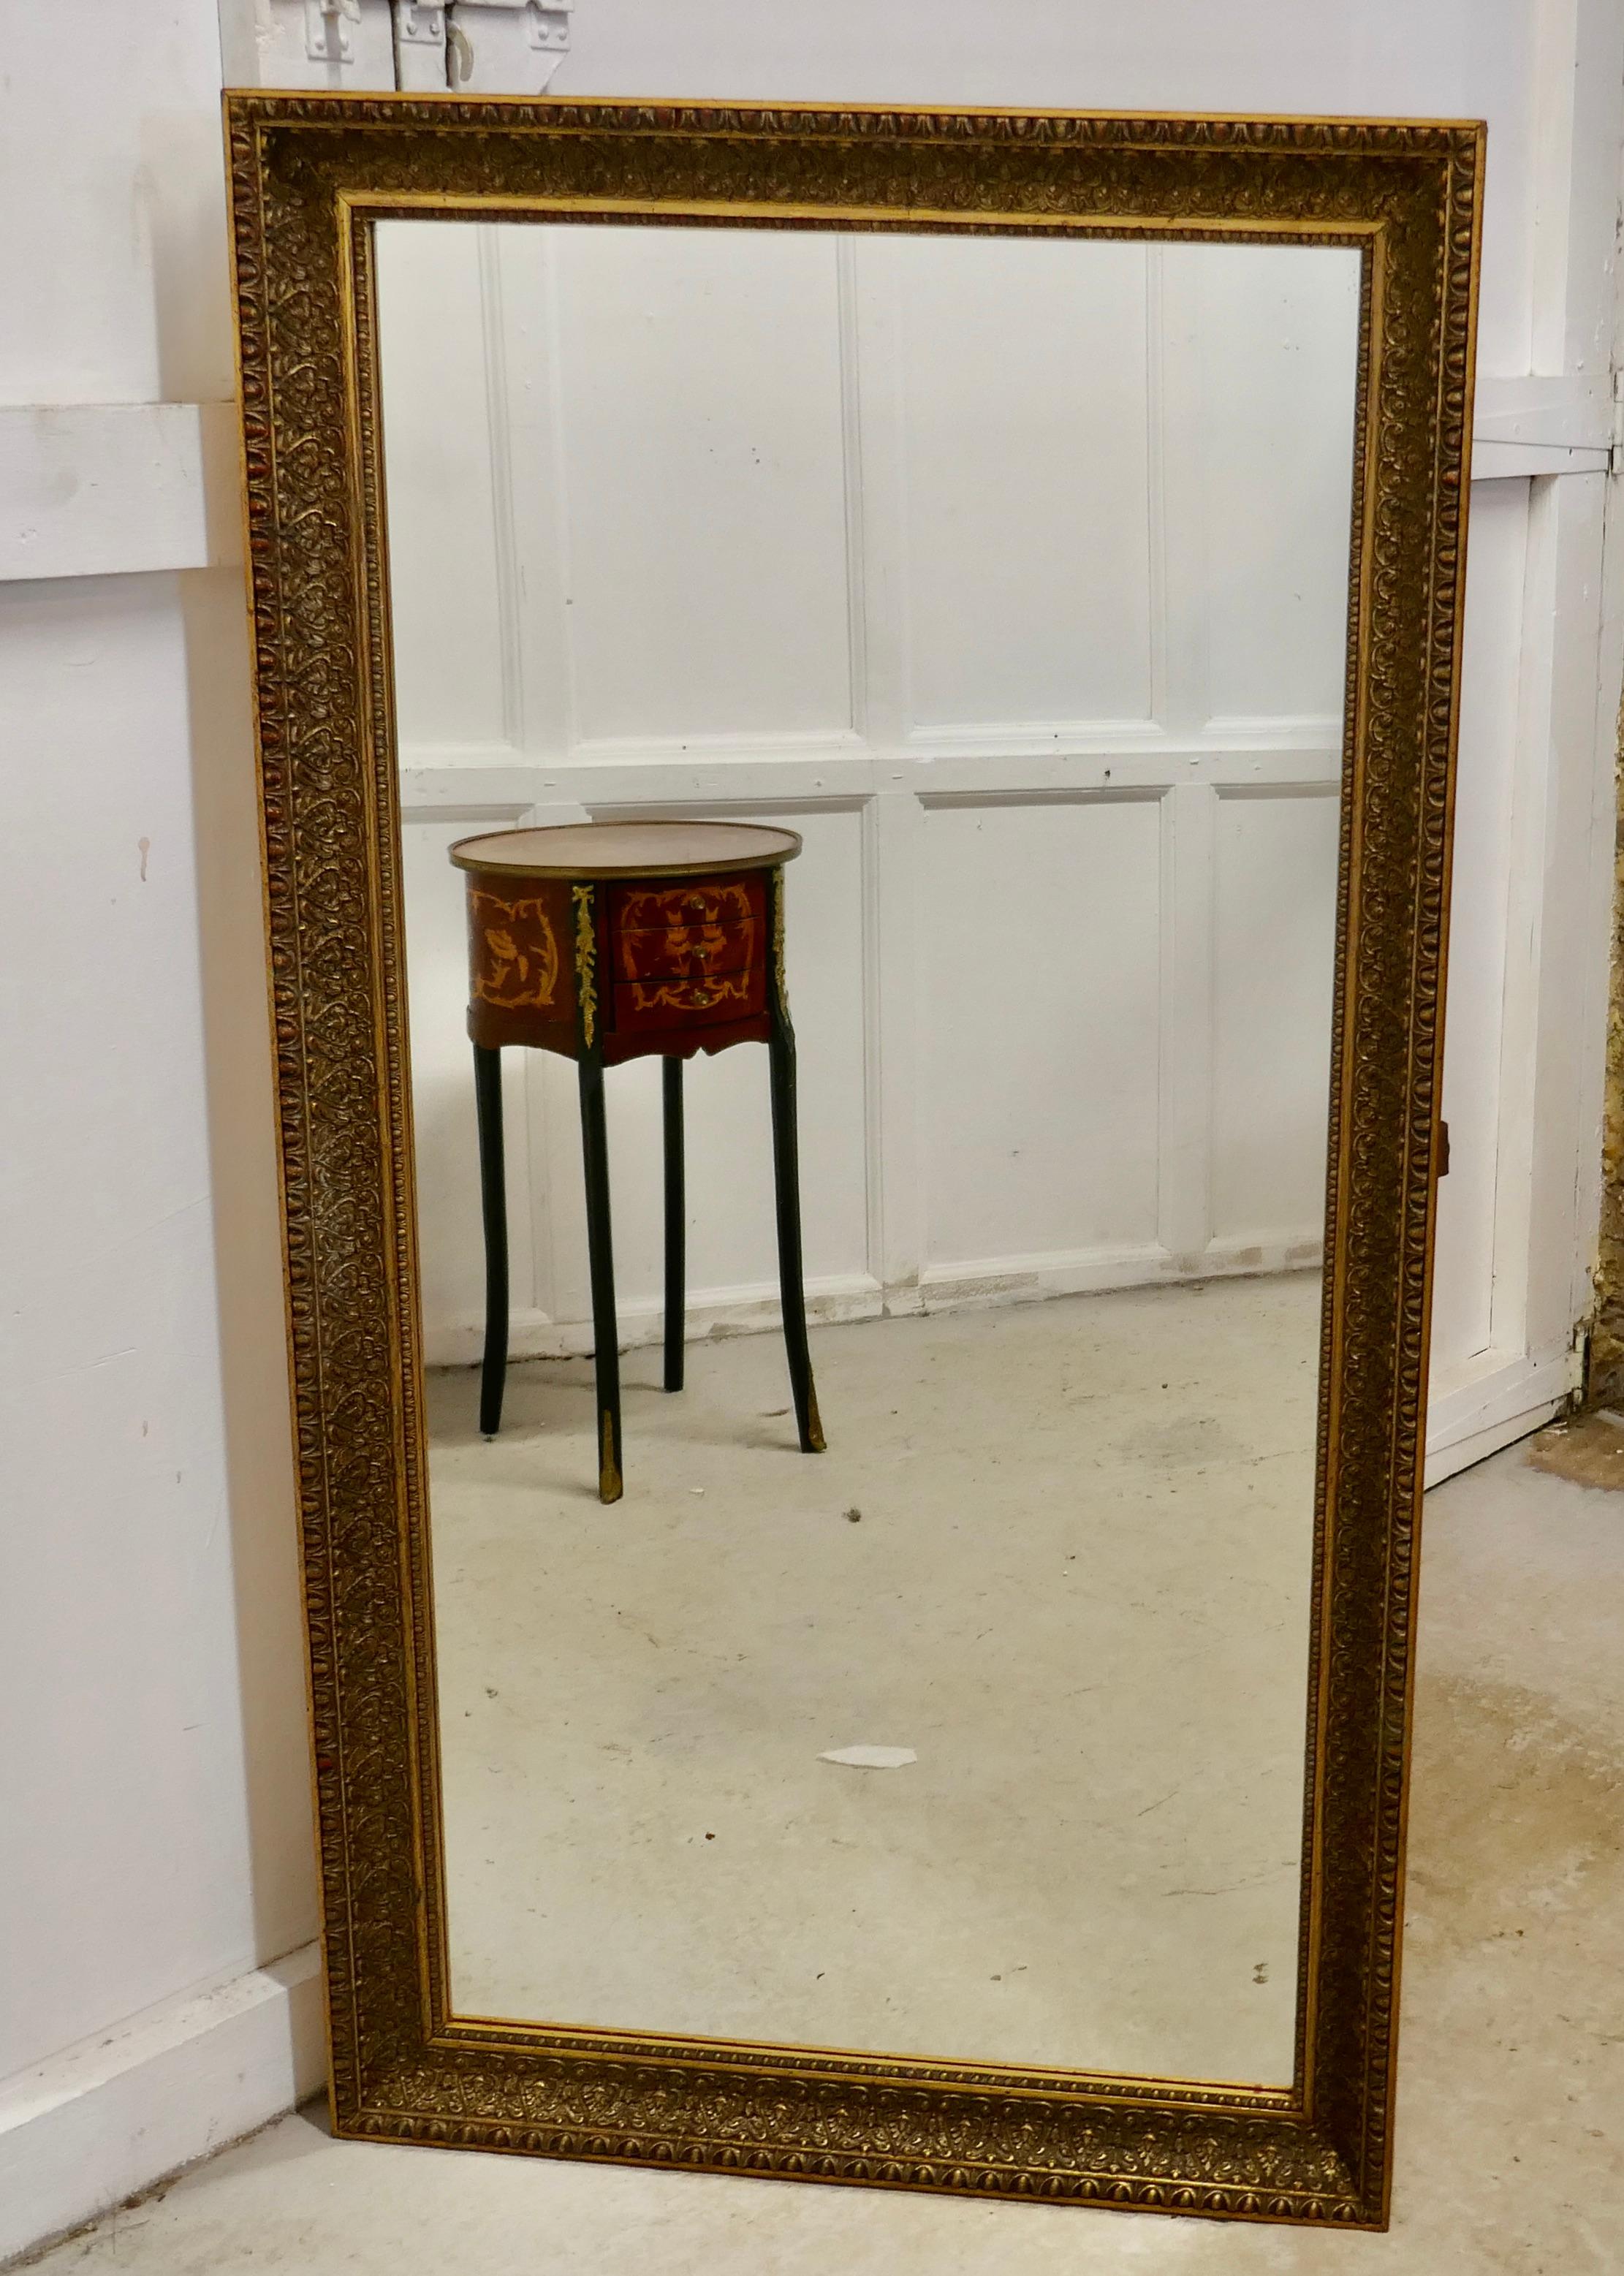 A 19th century French large gilt mirror

The Age Darkened Gold mirror frame is 3” wide with a decorative border
Both the mirror and the frame are in good condition, and will hang portrait or landscape the mirror is 38.5” high, 28” wide and 2”